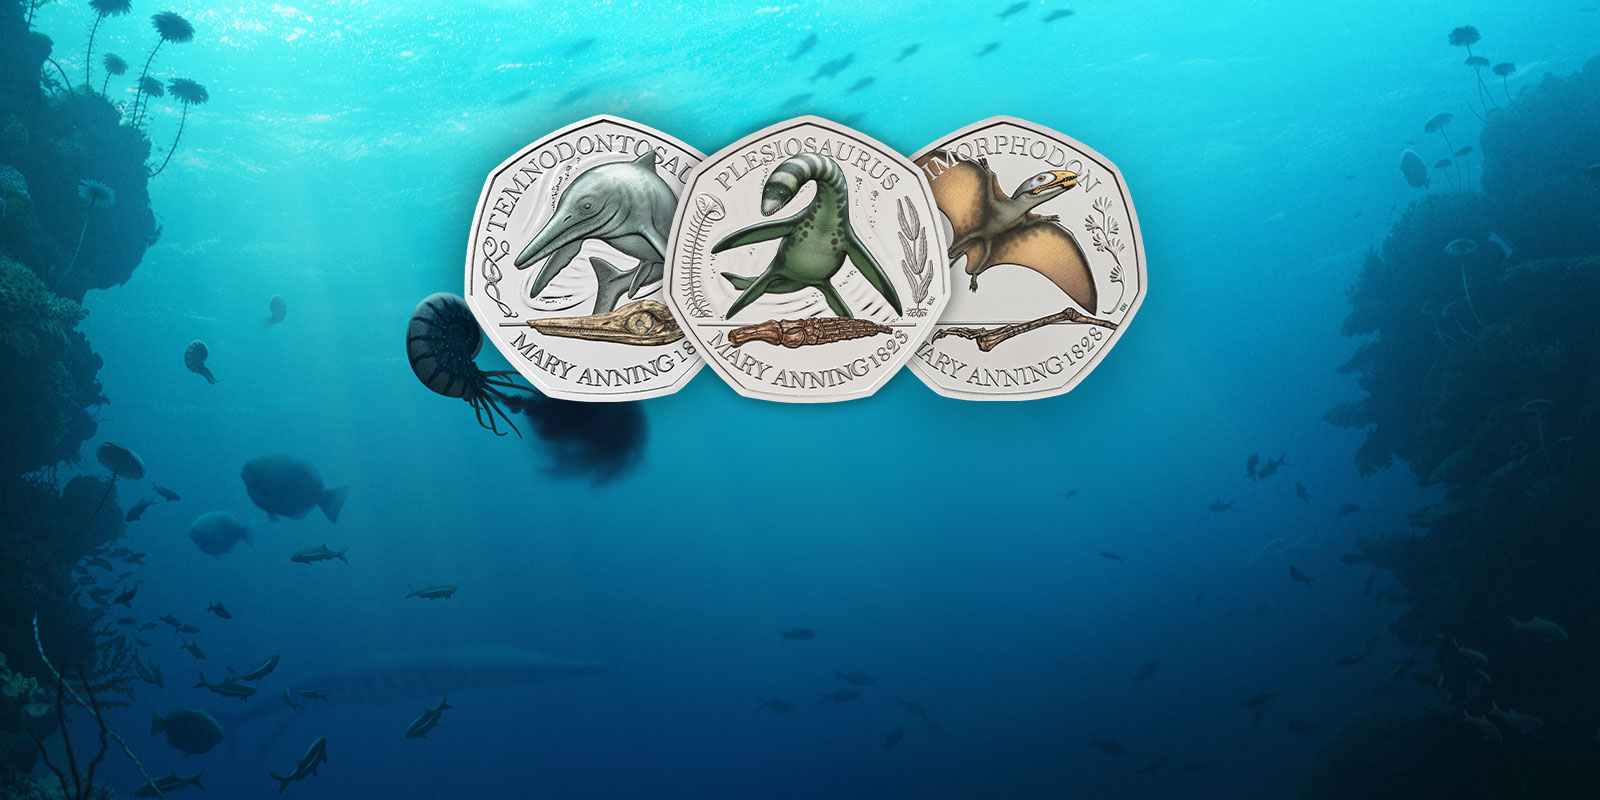 Mary Anning Coins